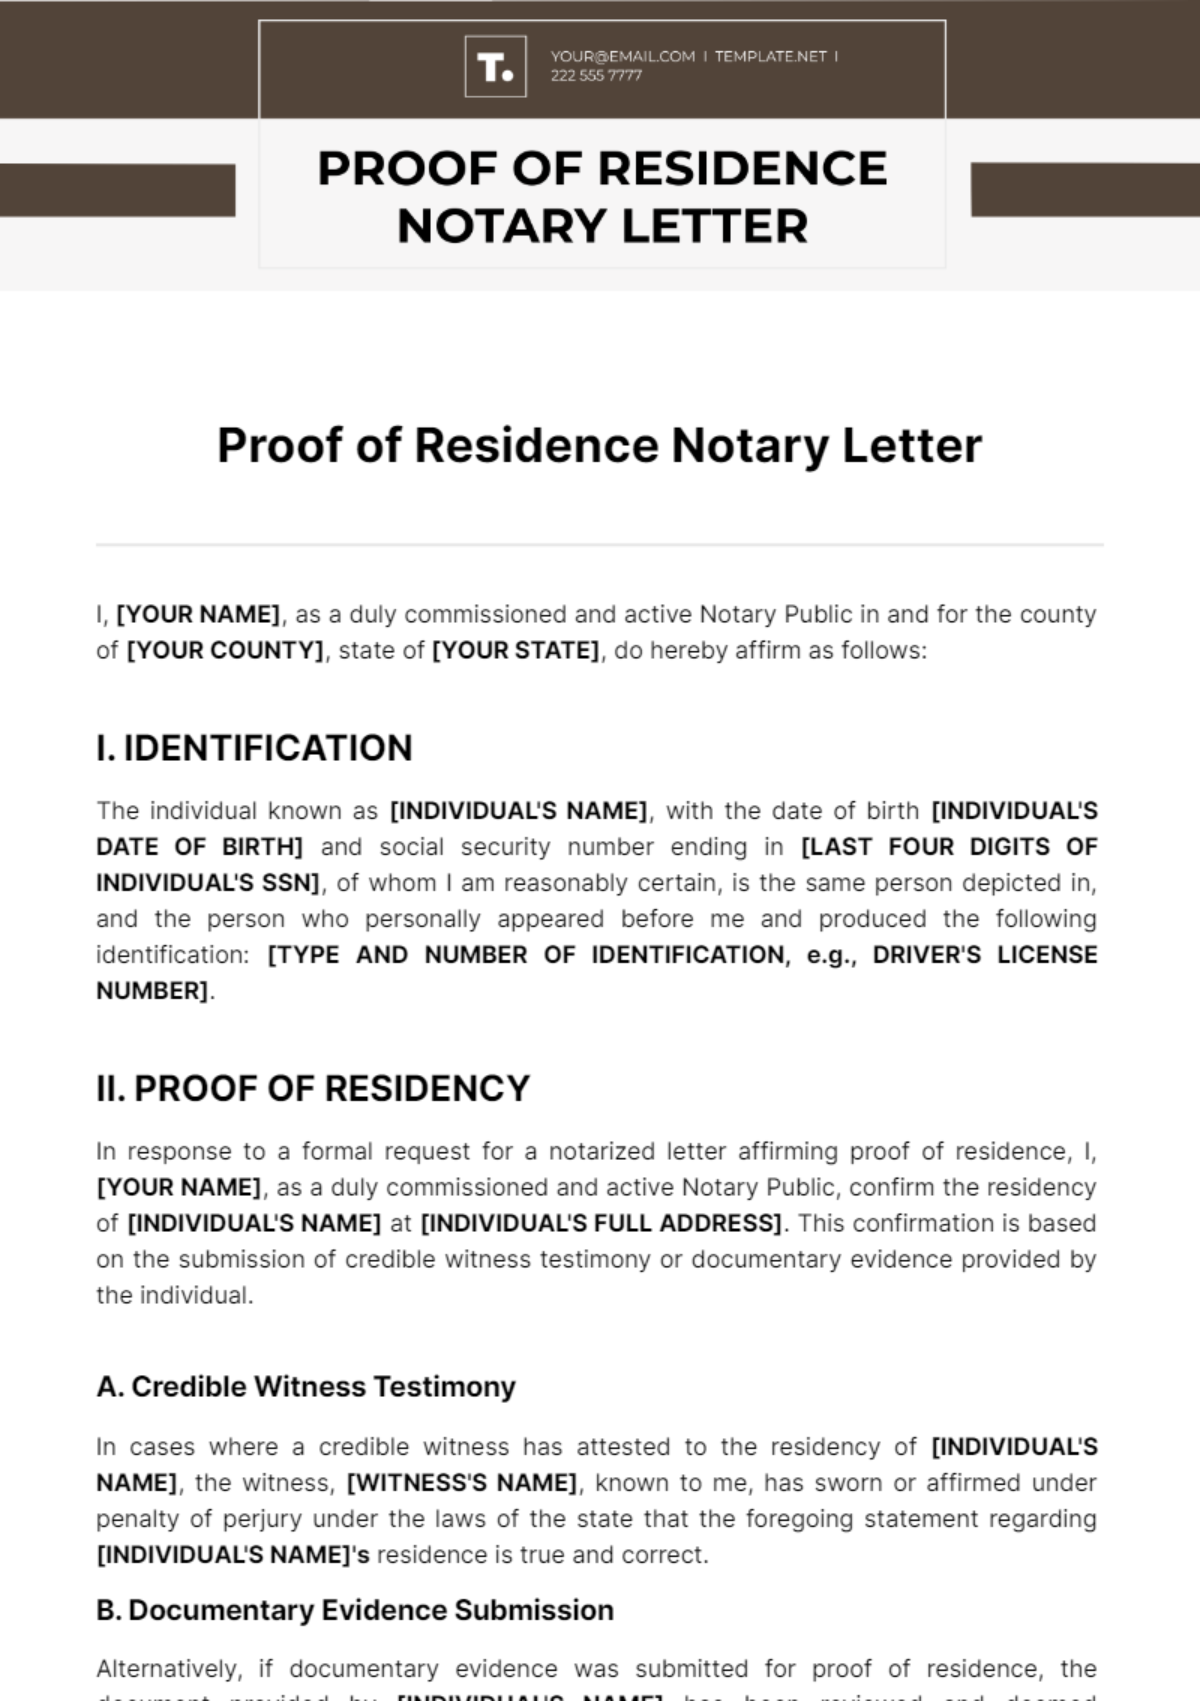 Free Proof of Residence Notary Letter Template